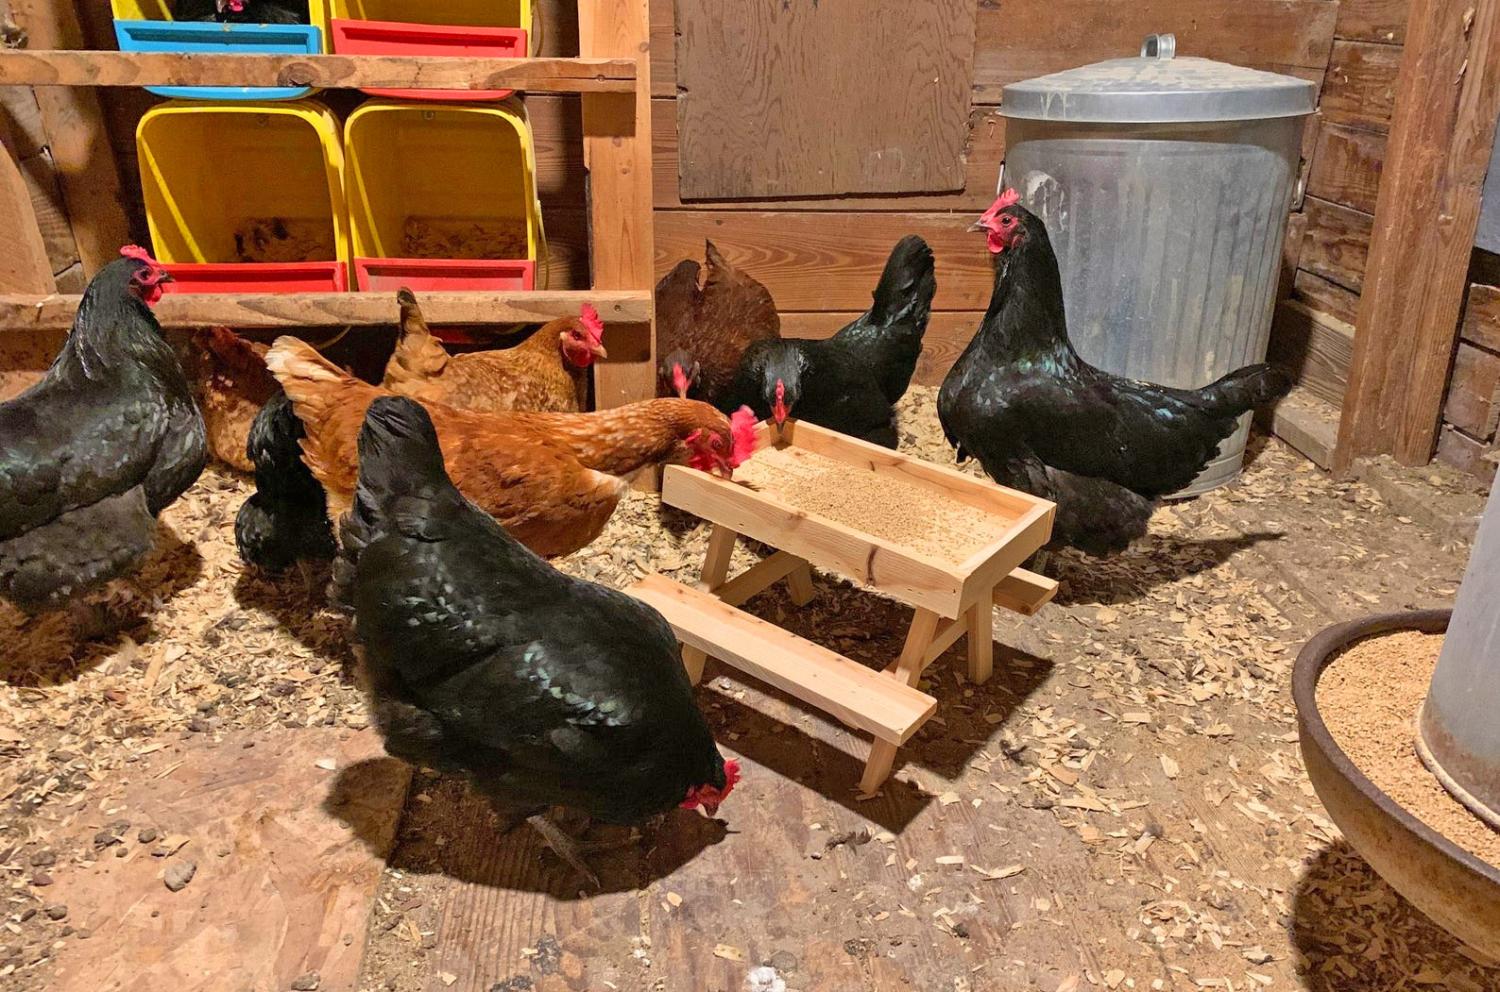 Mini Picnic Table For Chickens - Chicknic table - chicken picnic table